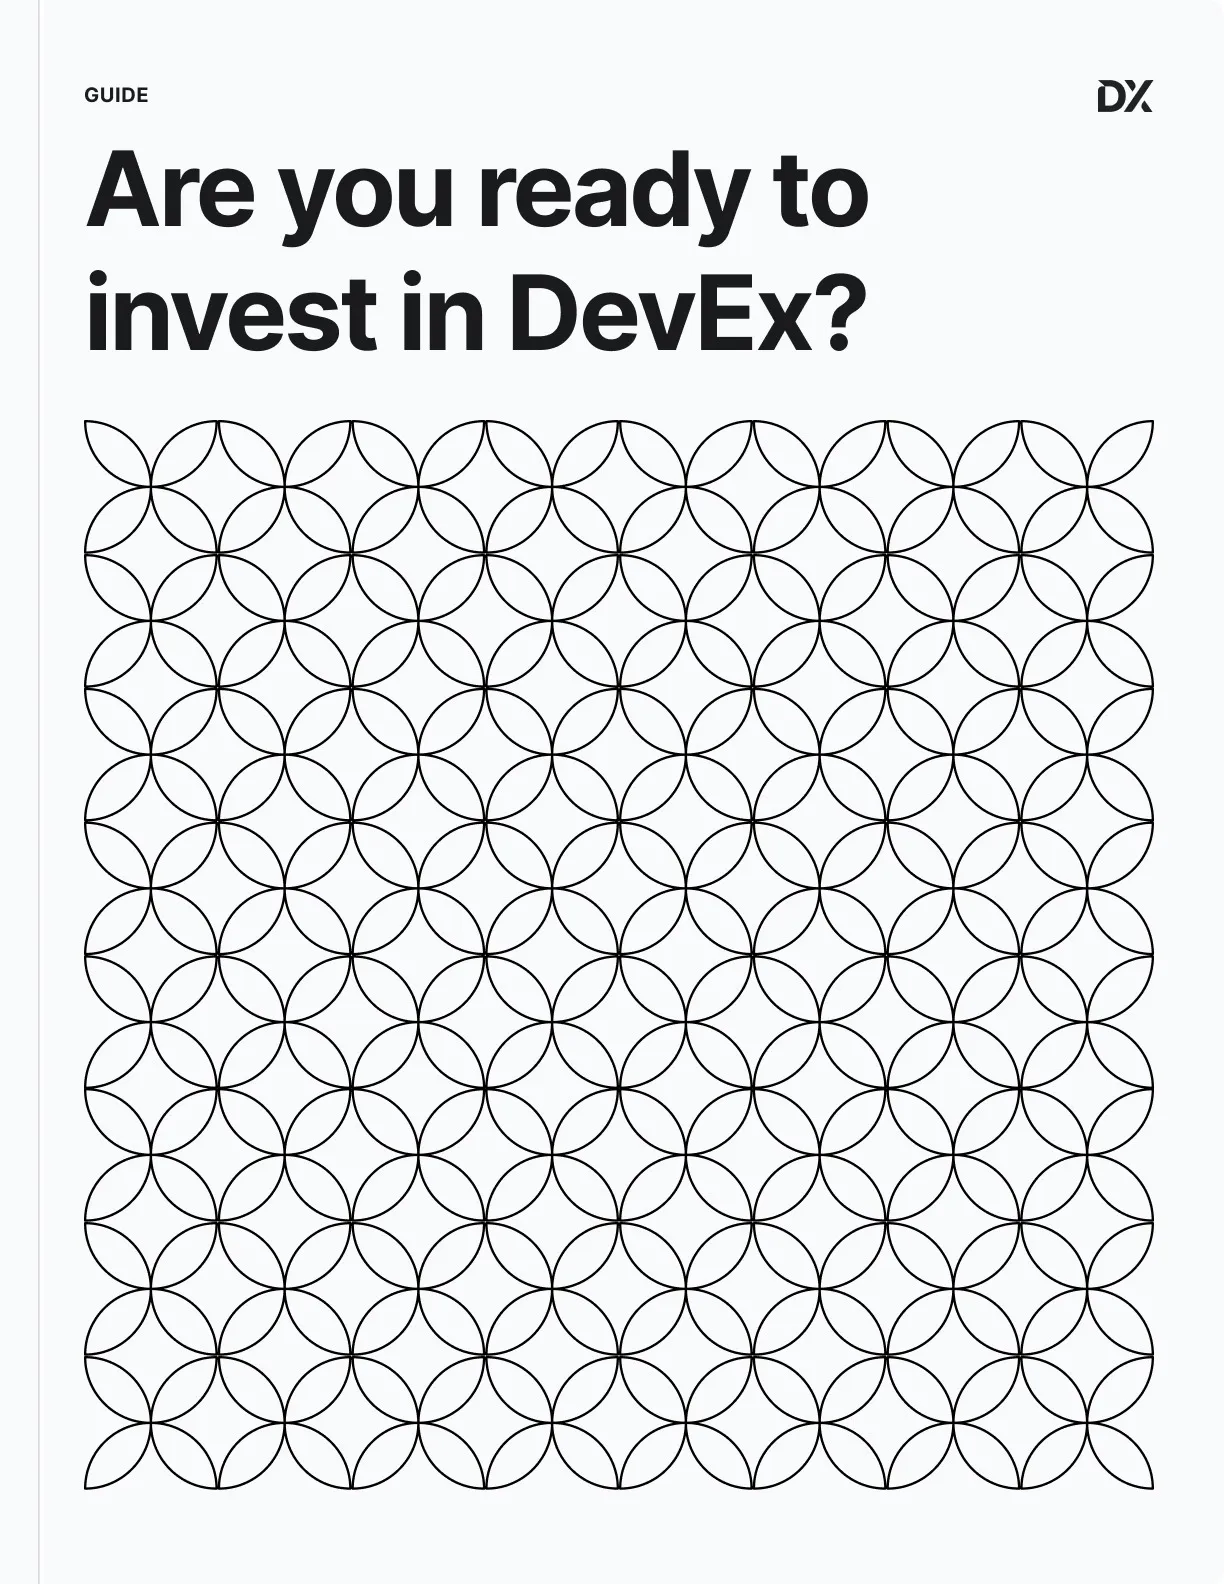 Are you ready to invest in DevEx?